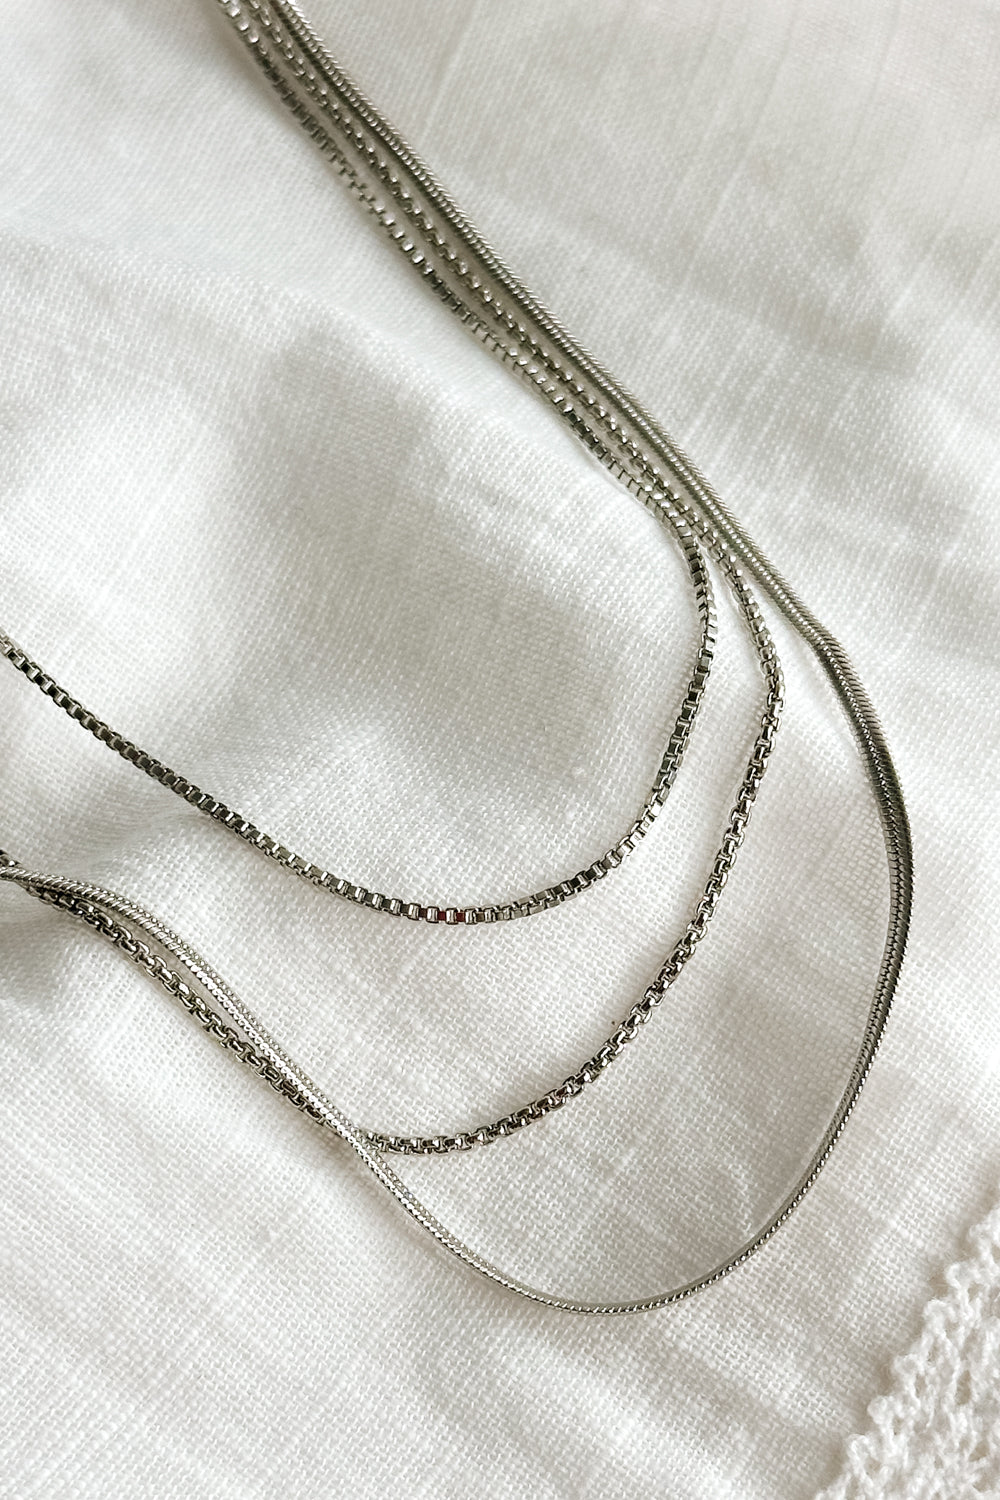 Close up view of the Camila Silver Triple Layered Chain Necklace which features silver triple layer chain necklace